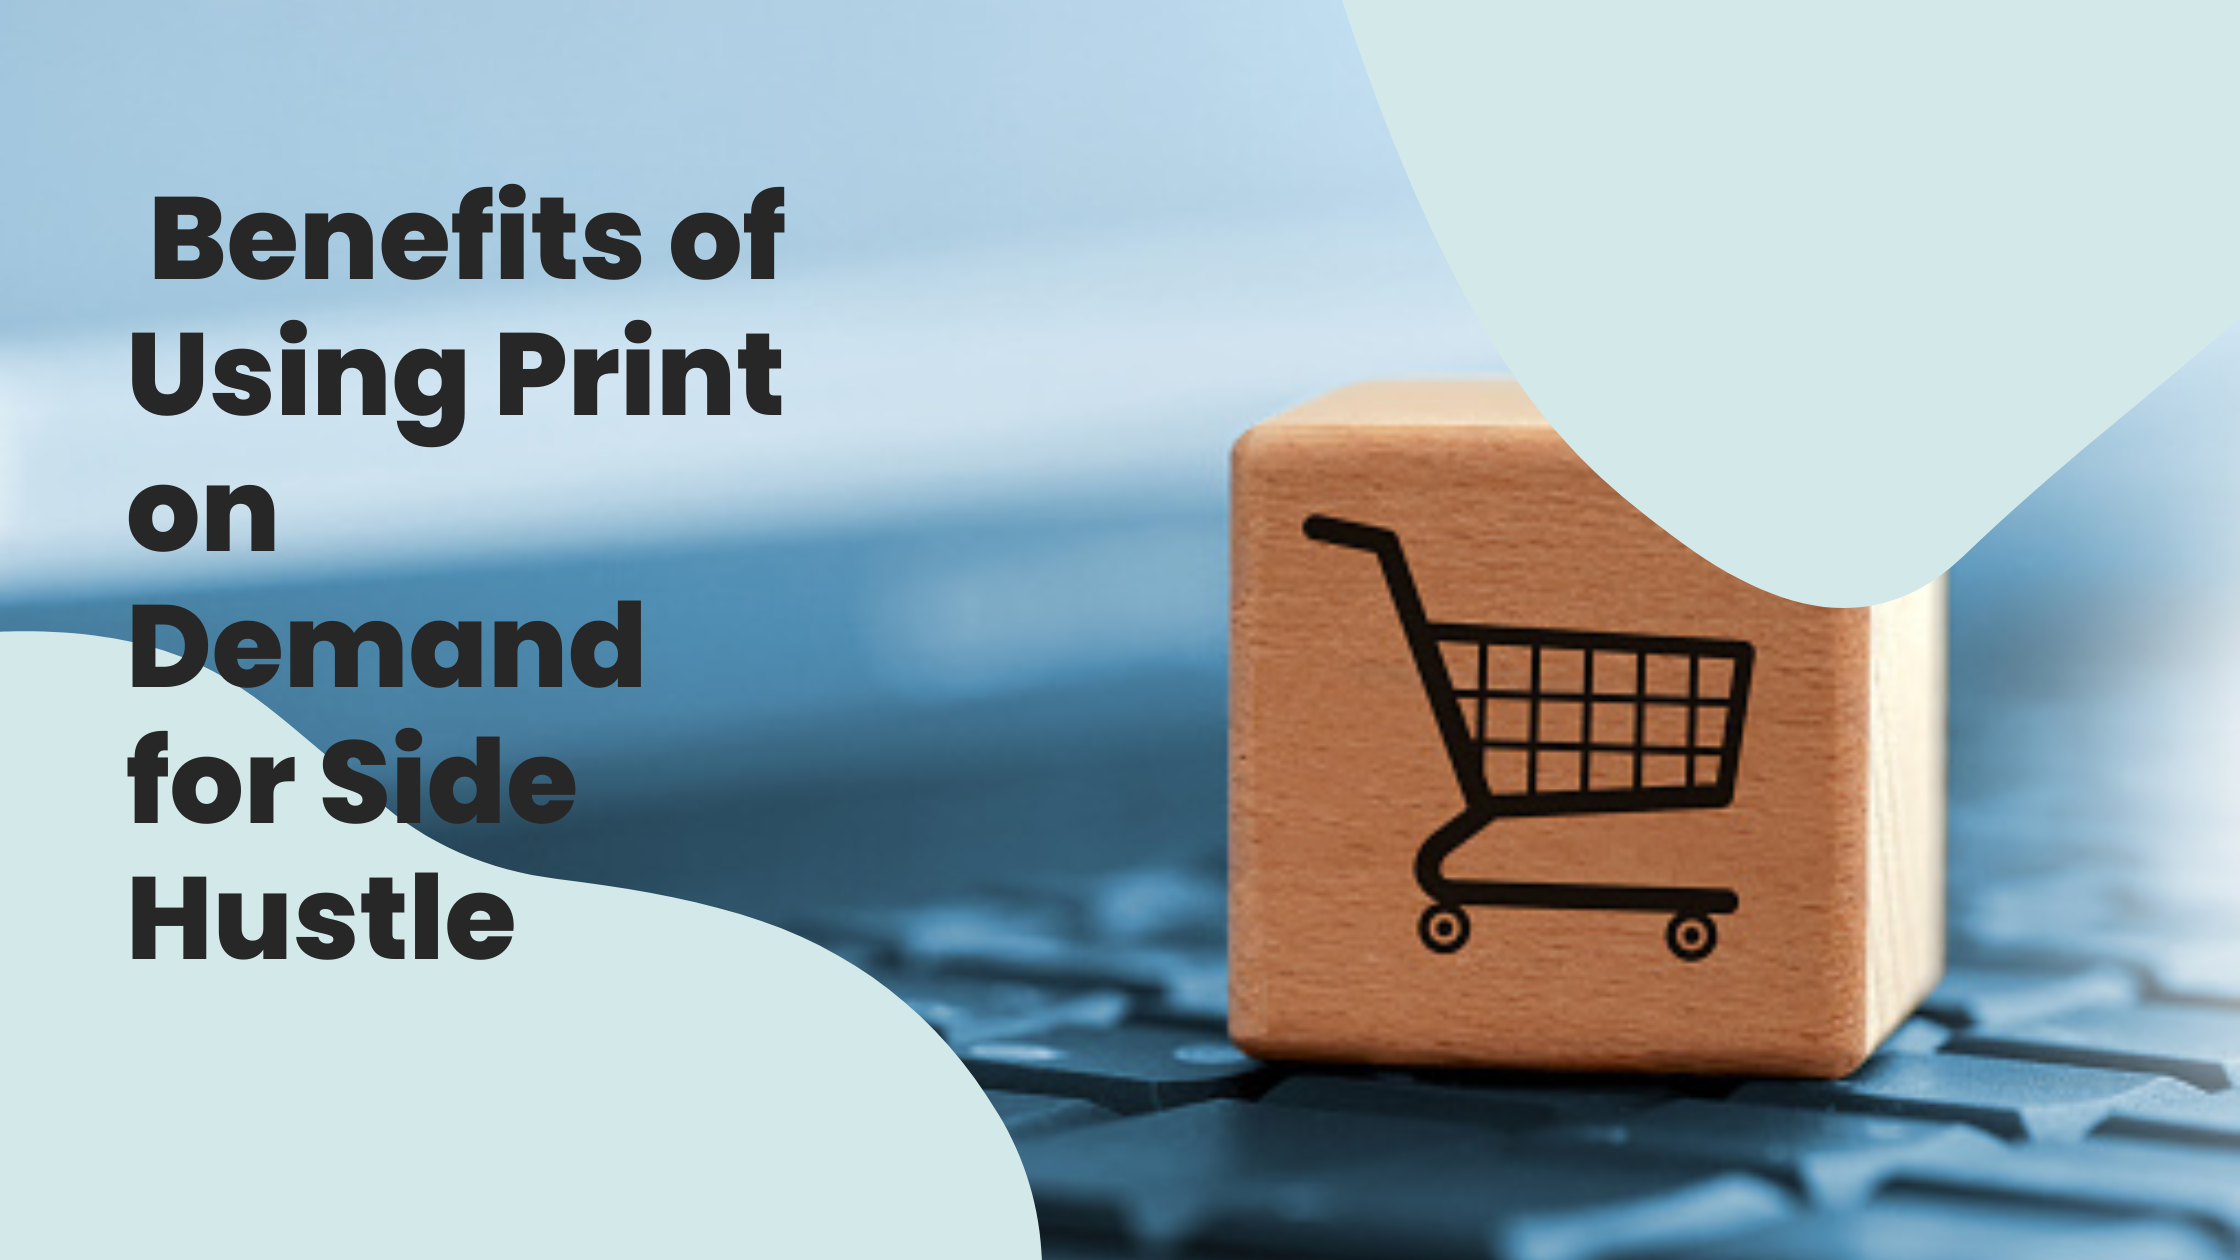 The Benefits of Using Print on Demand for Your Side Hustle